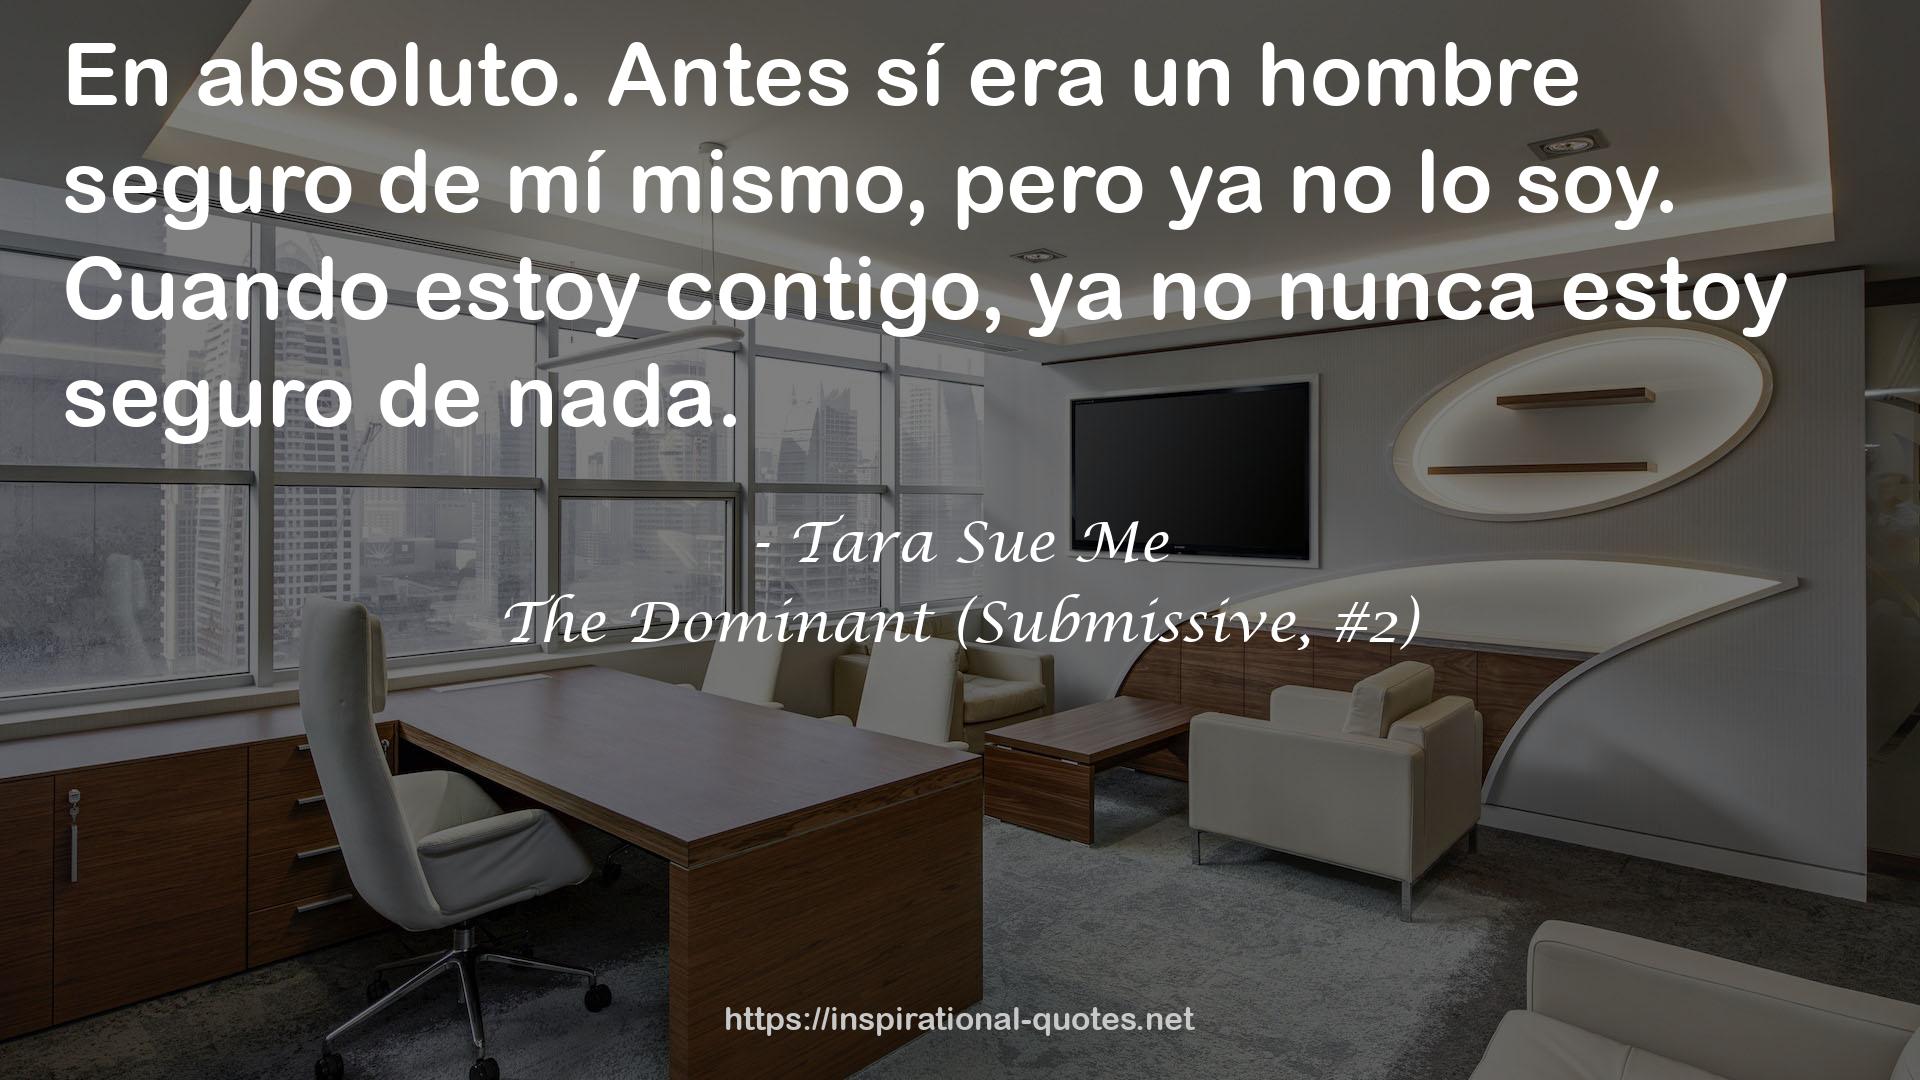 The Dominant (Submissive, #2) QUOTES